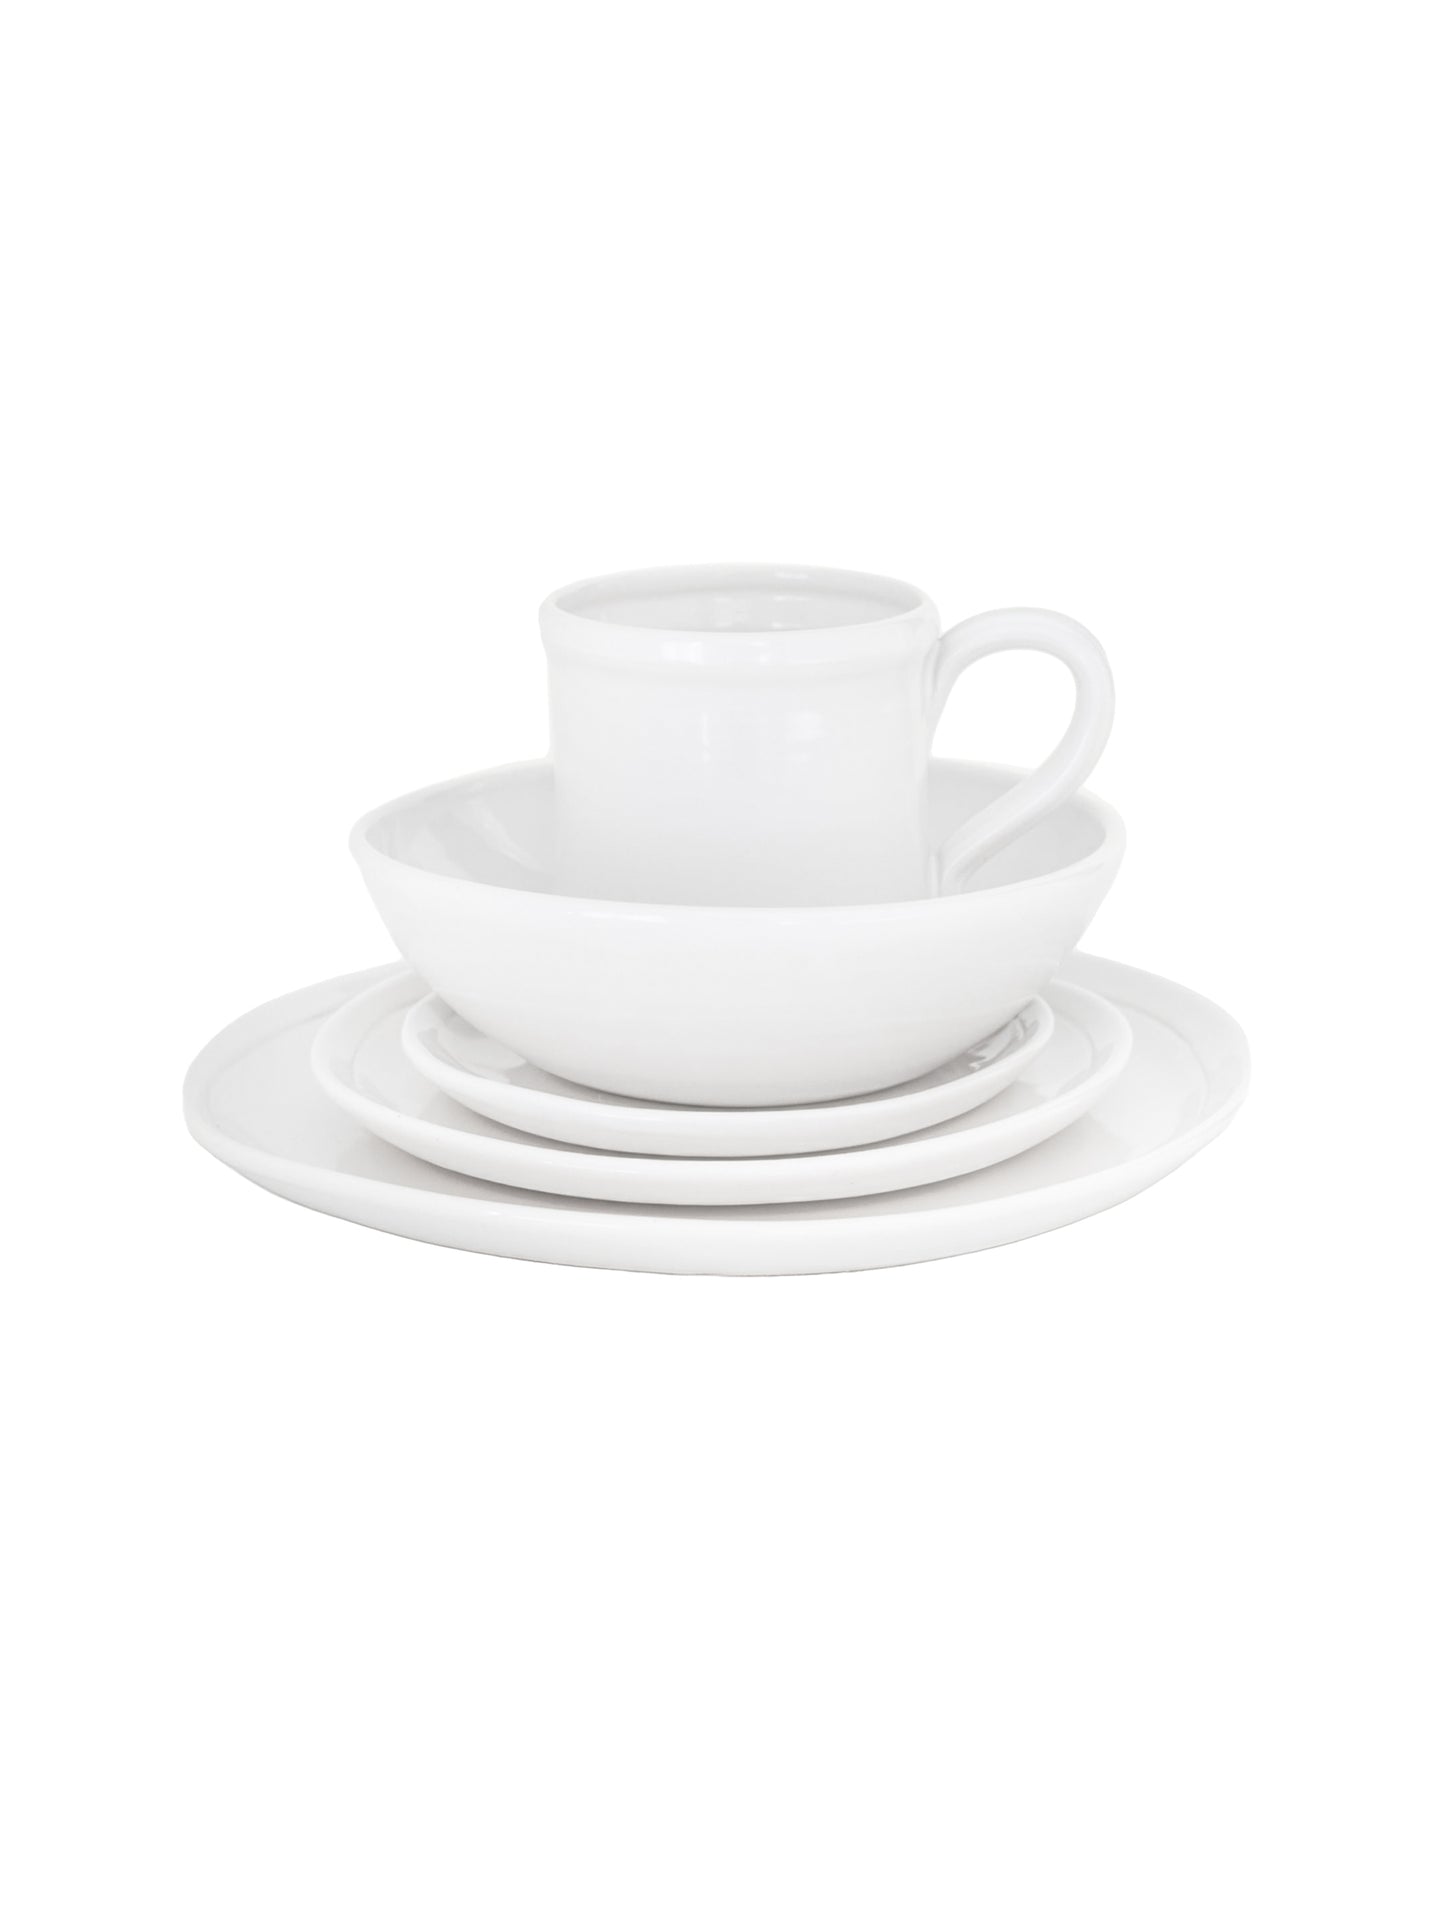 McQueen Pottery Milk White Dinnerware 5 Piece Place Setting Weston Table